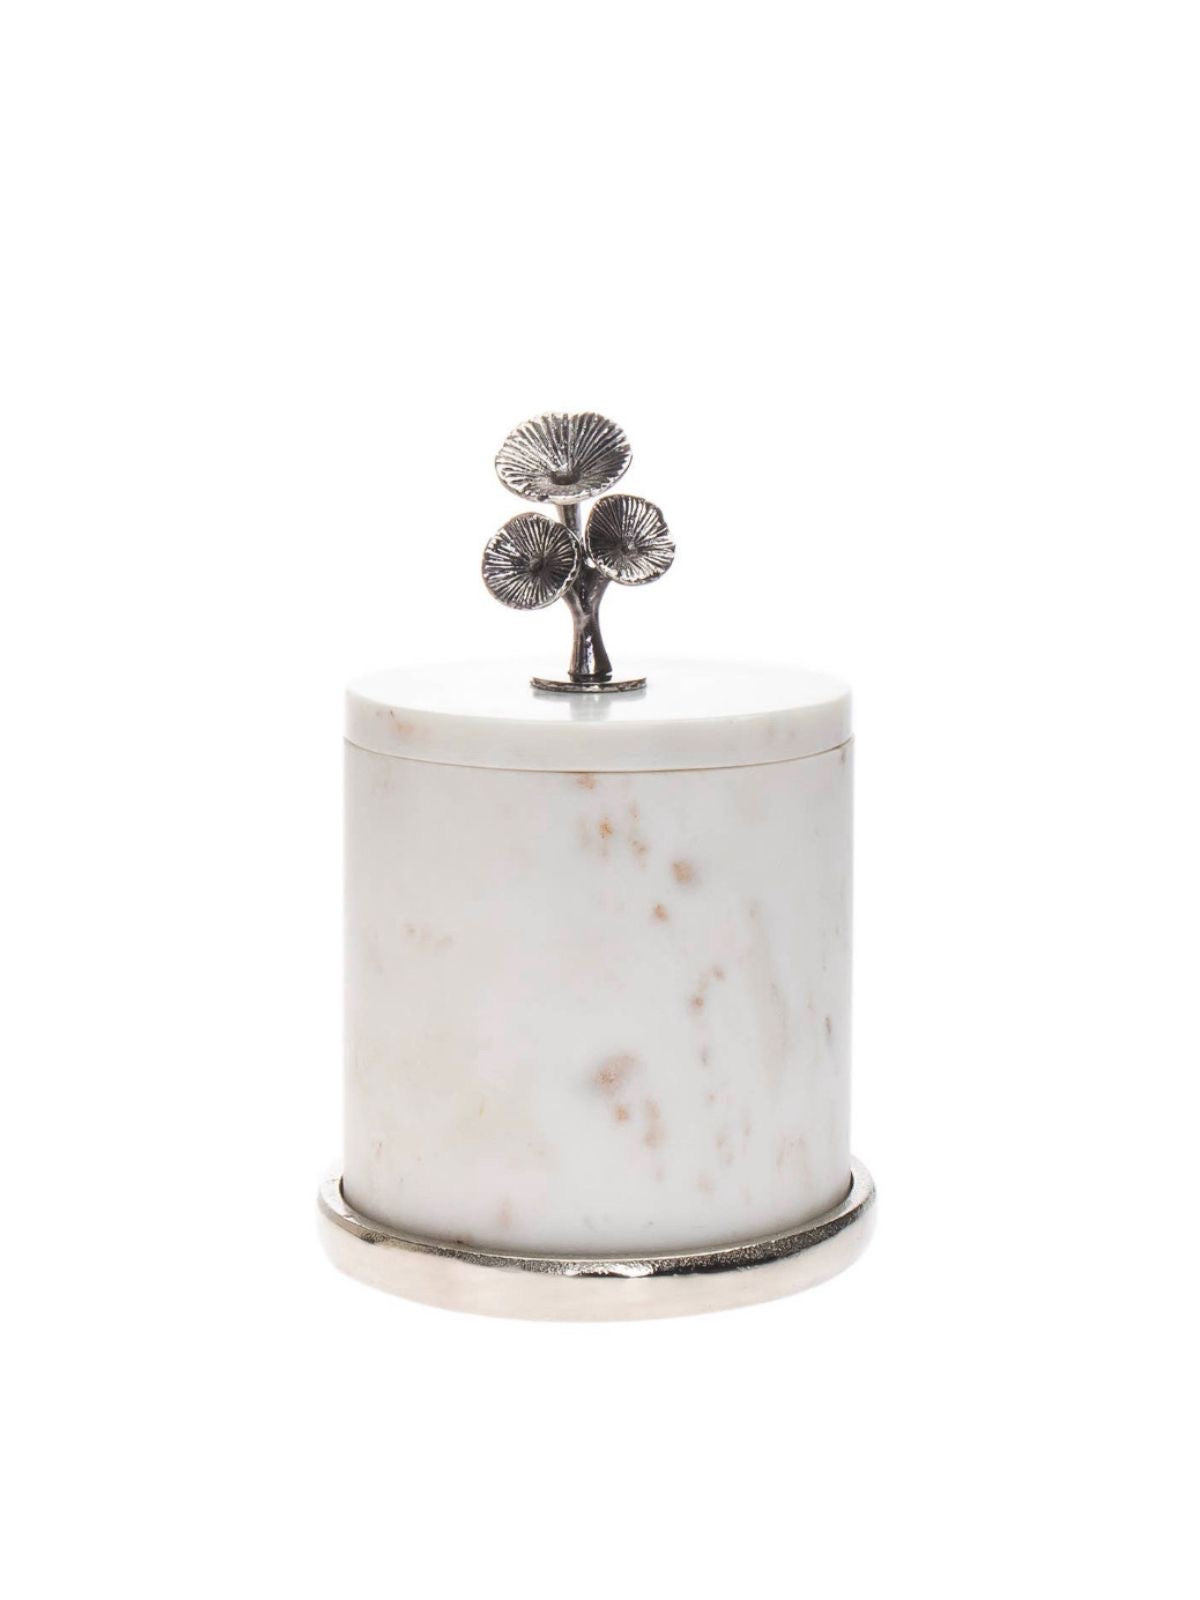 5.5H White Marble Luxury Kitchen Canisters with Silver Metal Floral Design on Lids - KYA Home Decor.